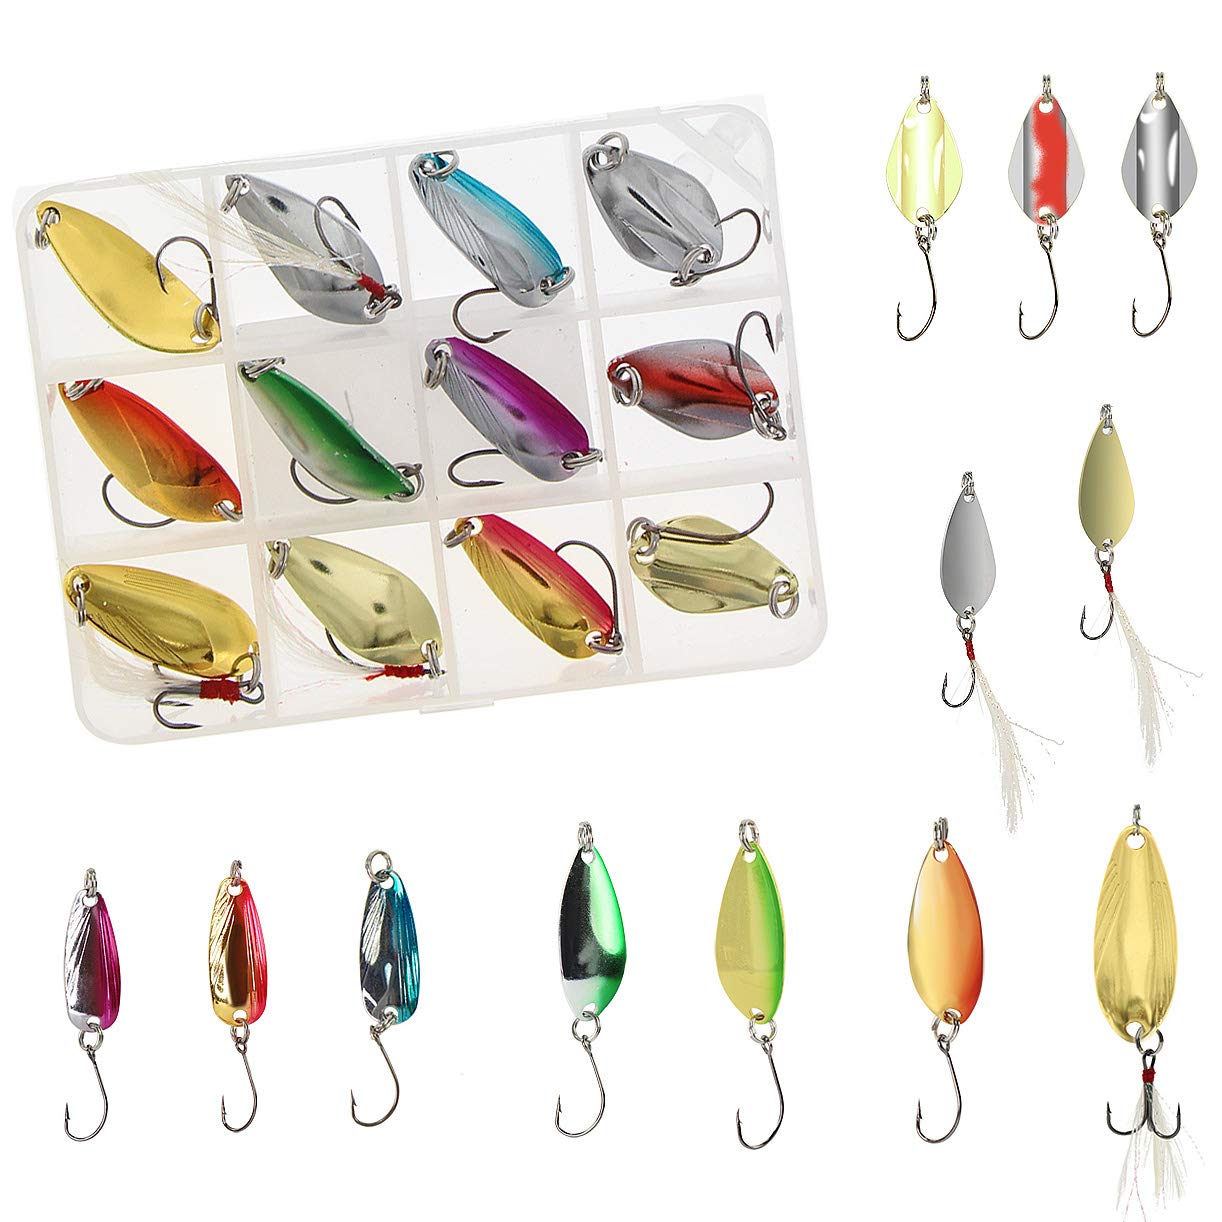 Fishing Spoon Lure Set Metal Baits for Trout Char and Perch